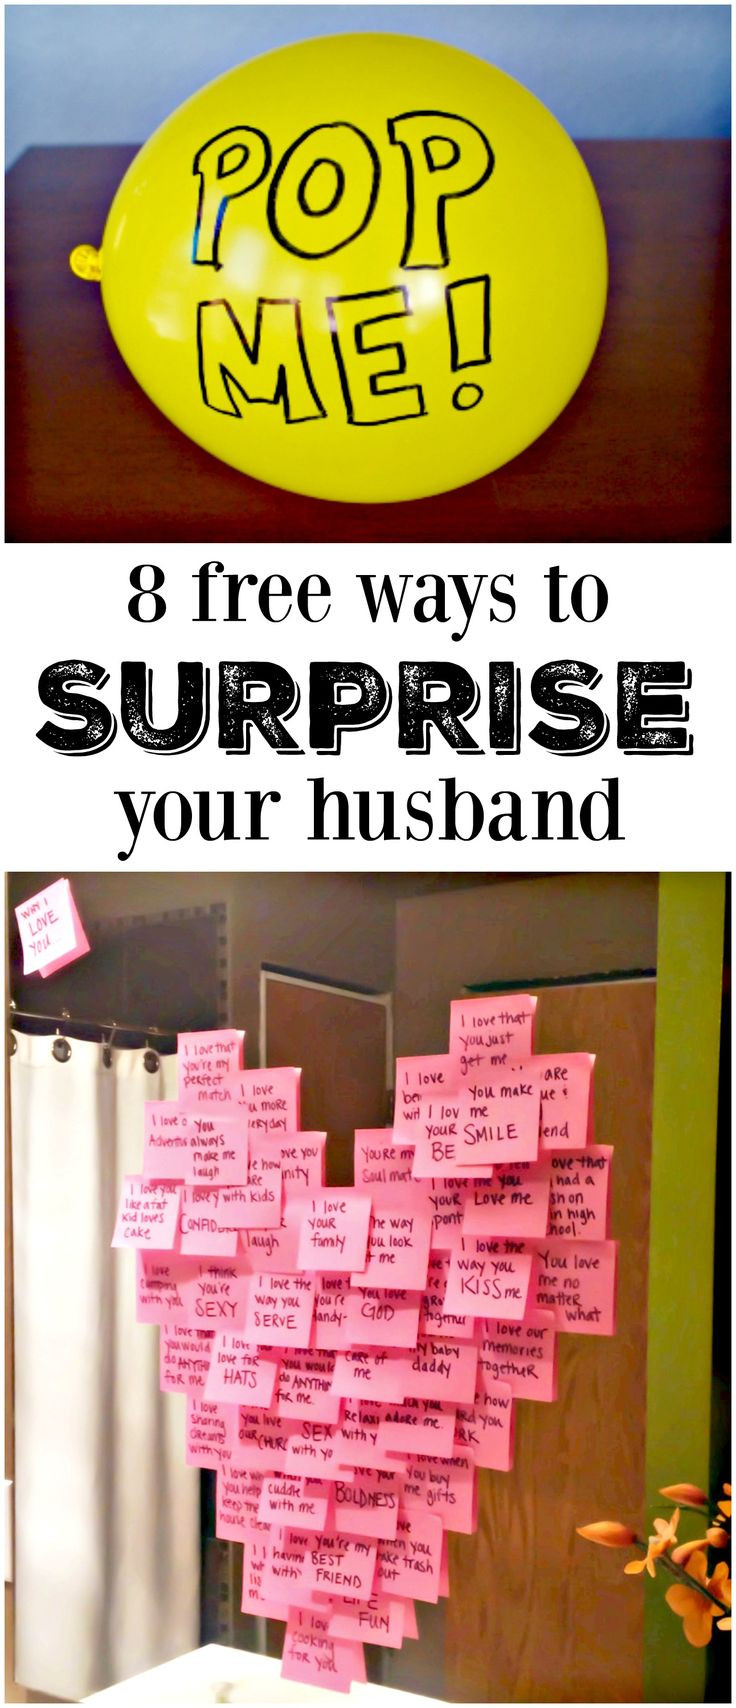 Birthday Gift Ideas For Husband
 25 best ideas about Husband birthday ts on Pinterest